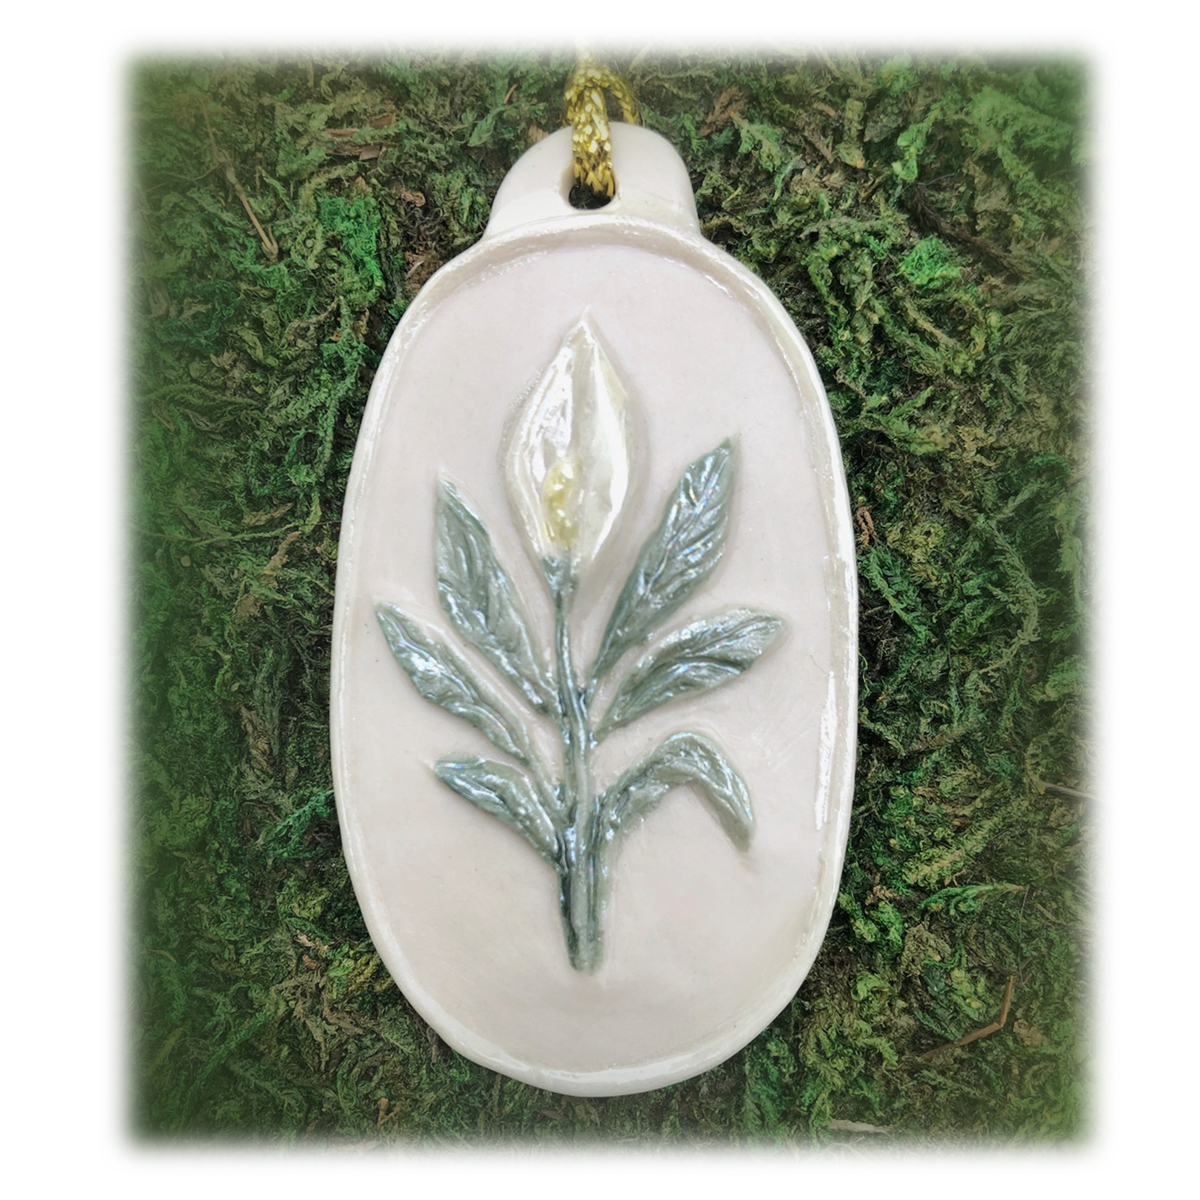 Peace Lily - Mystic Images Keepsakes